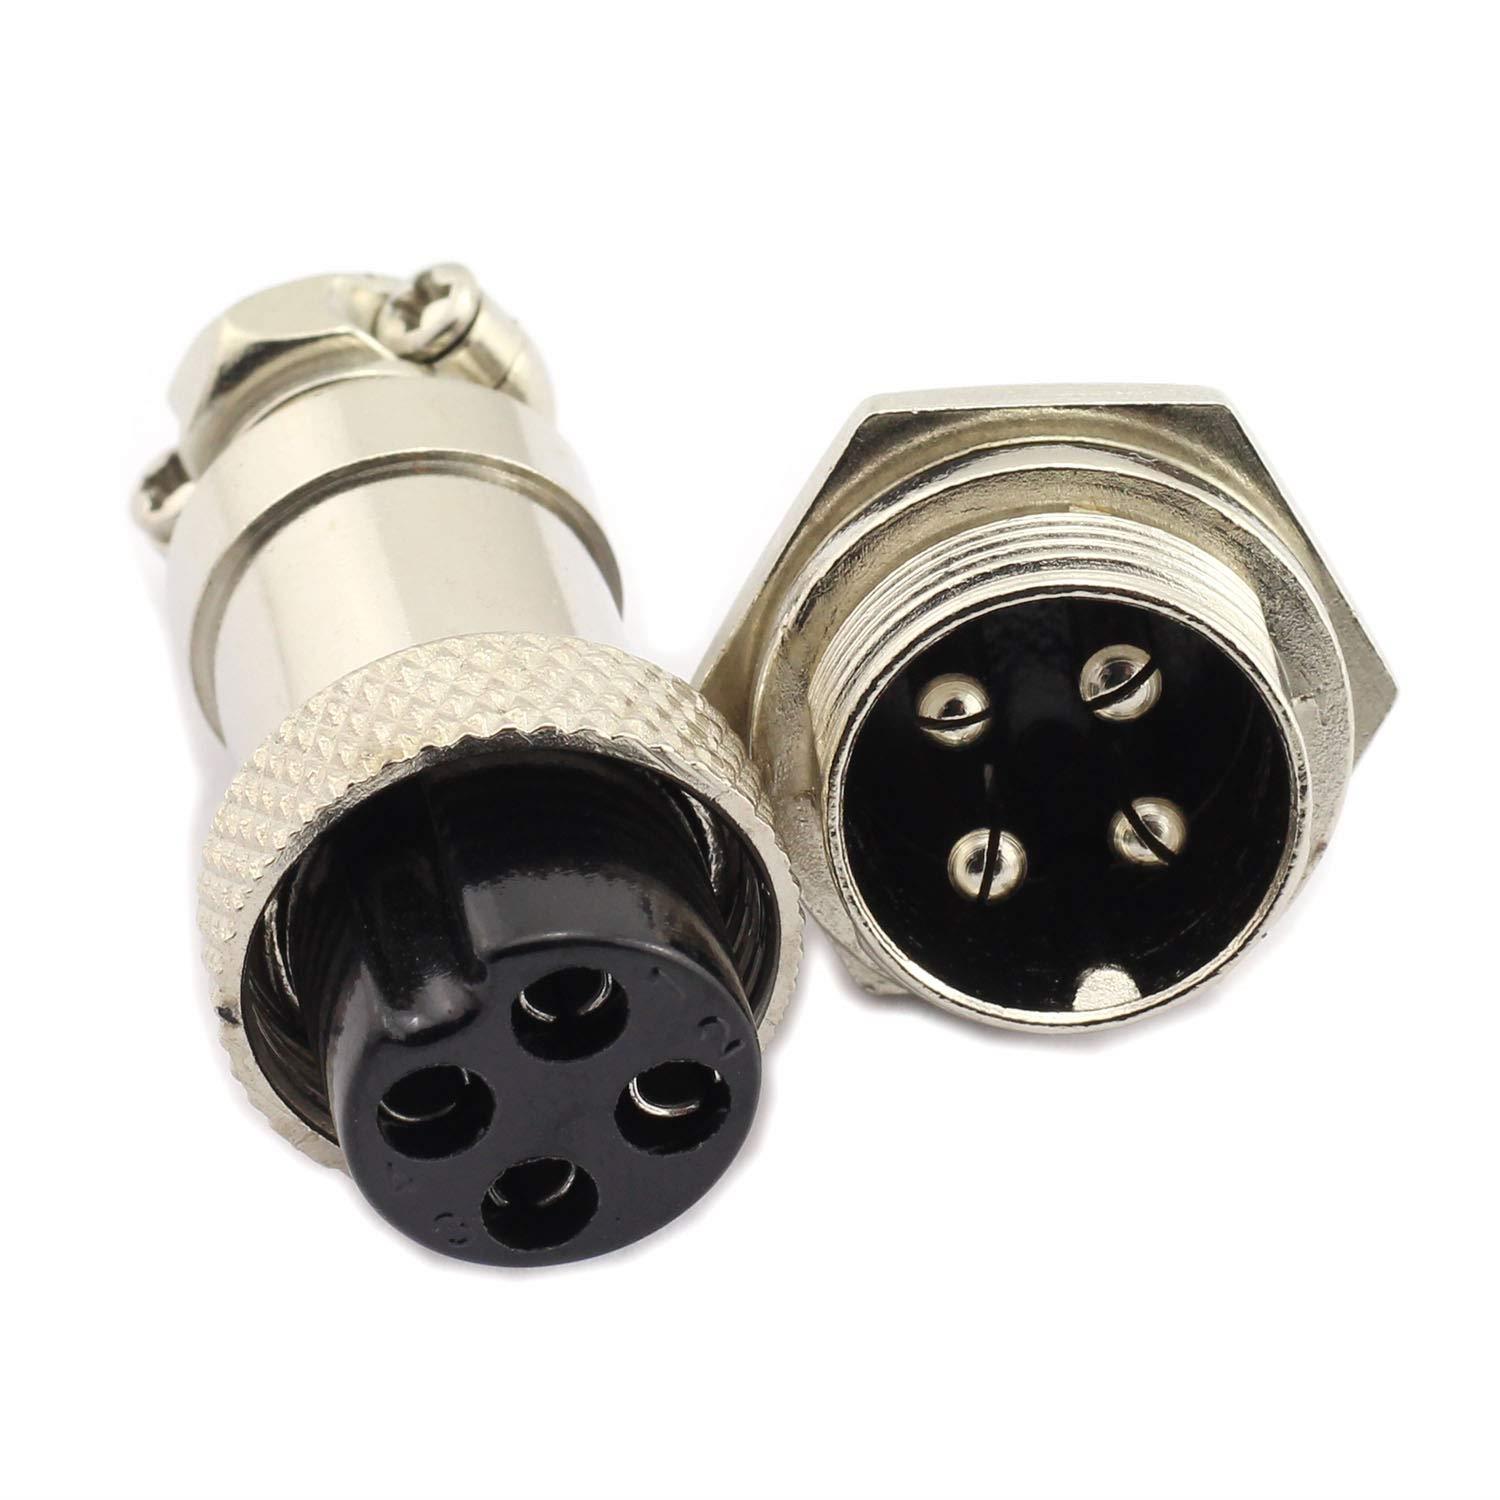 GX-16 GX16 4Pin Male Female Circular Aviation Connector Plug 16MM Wire Panel Metal Connector